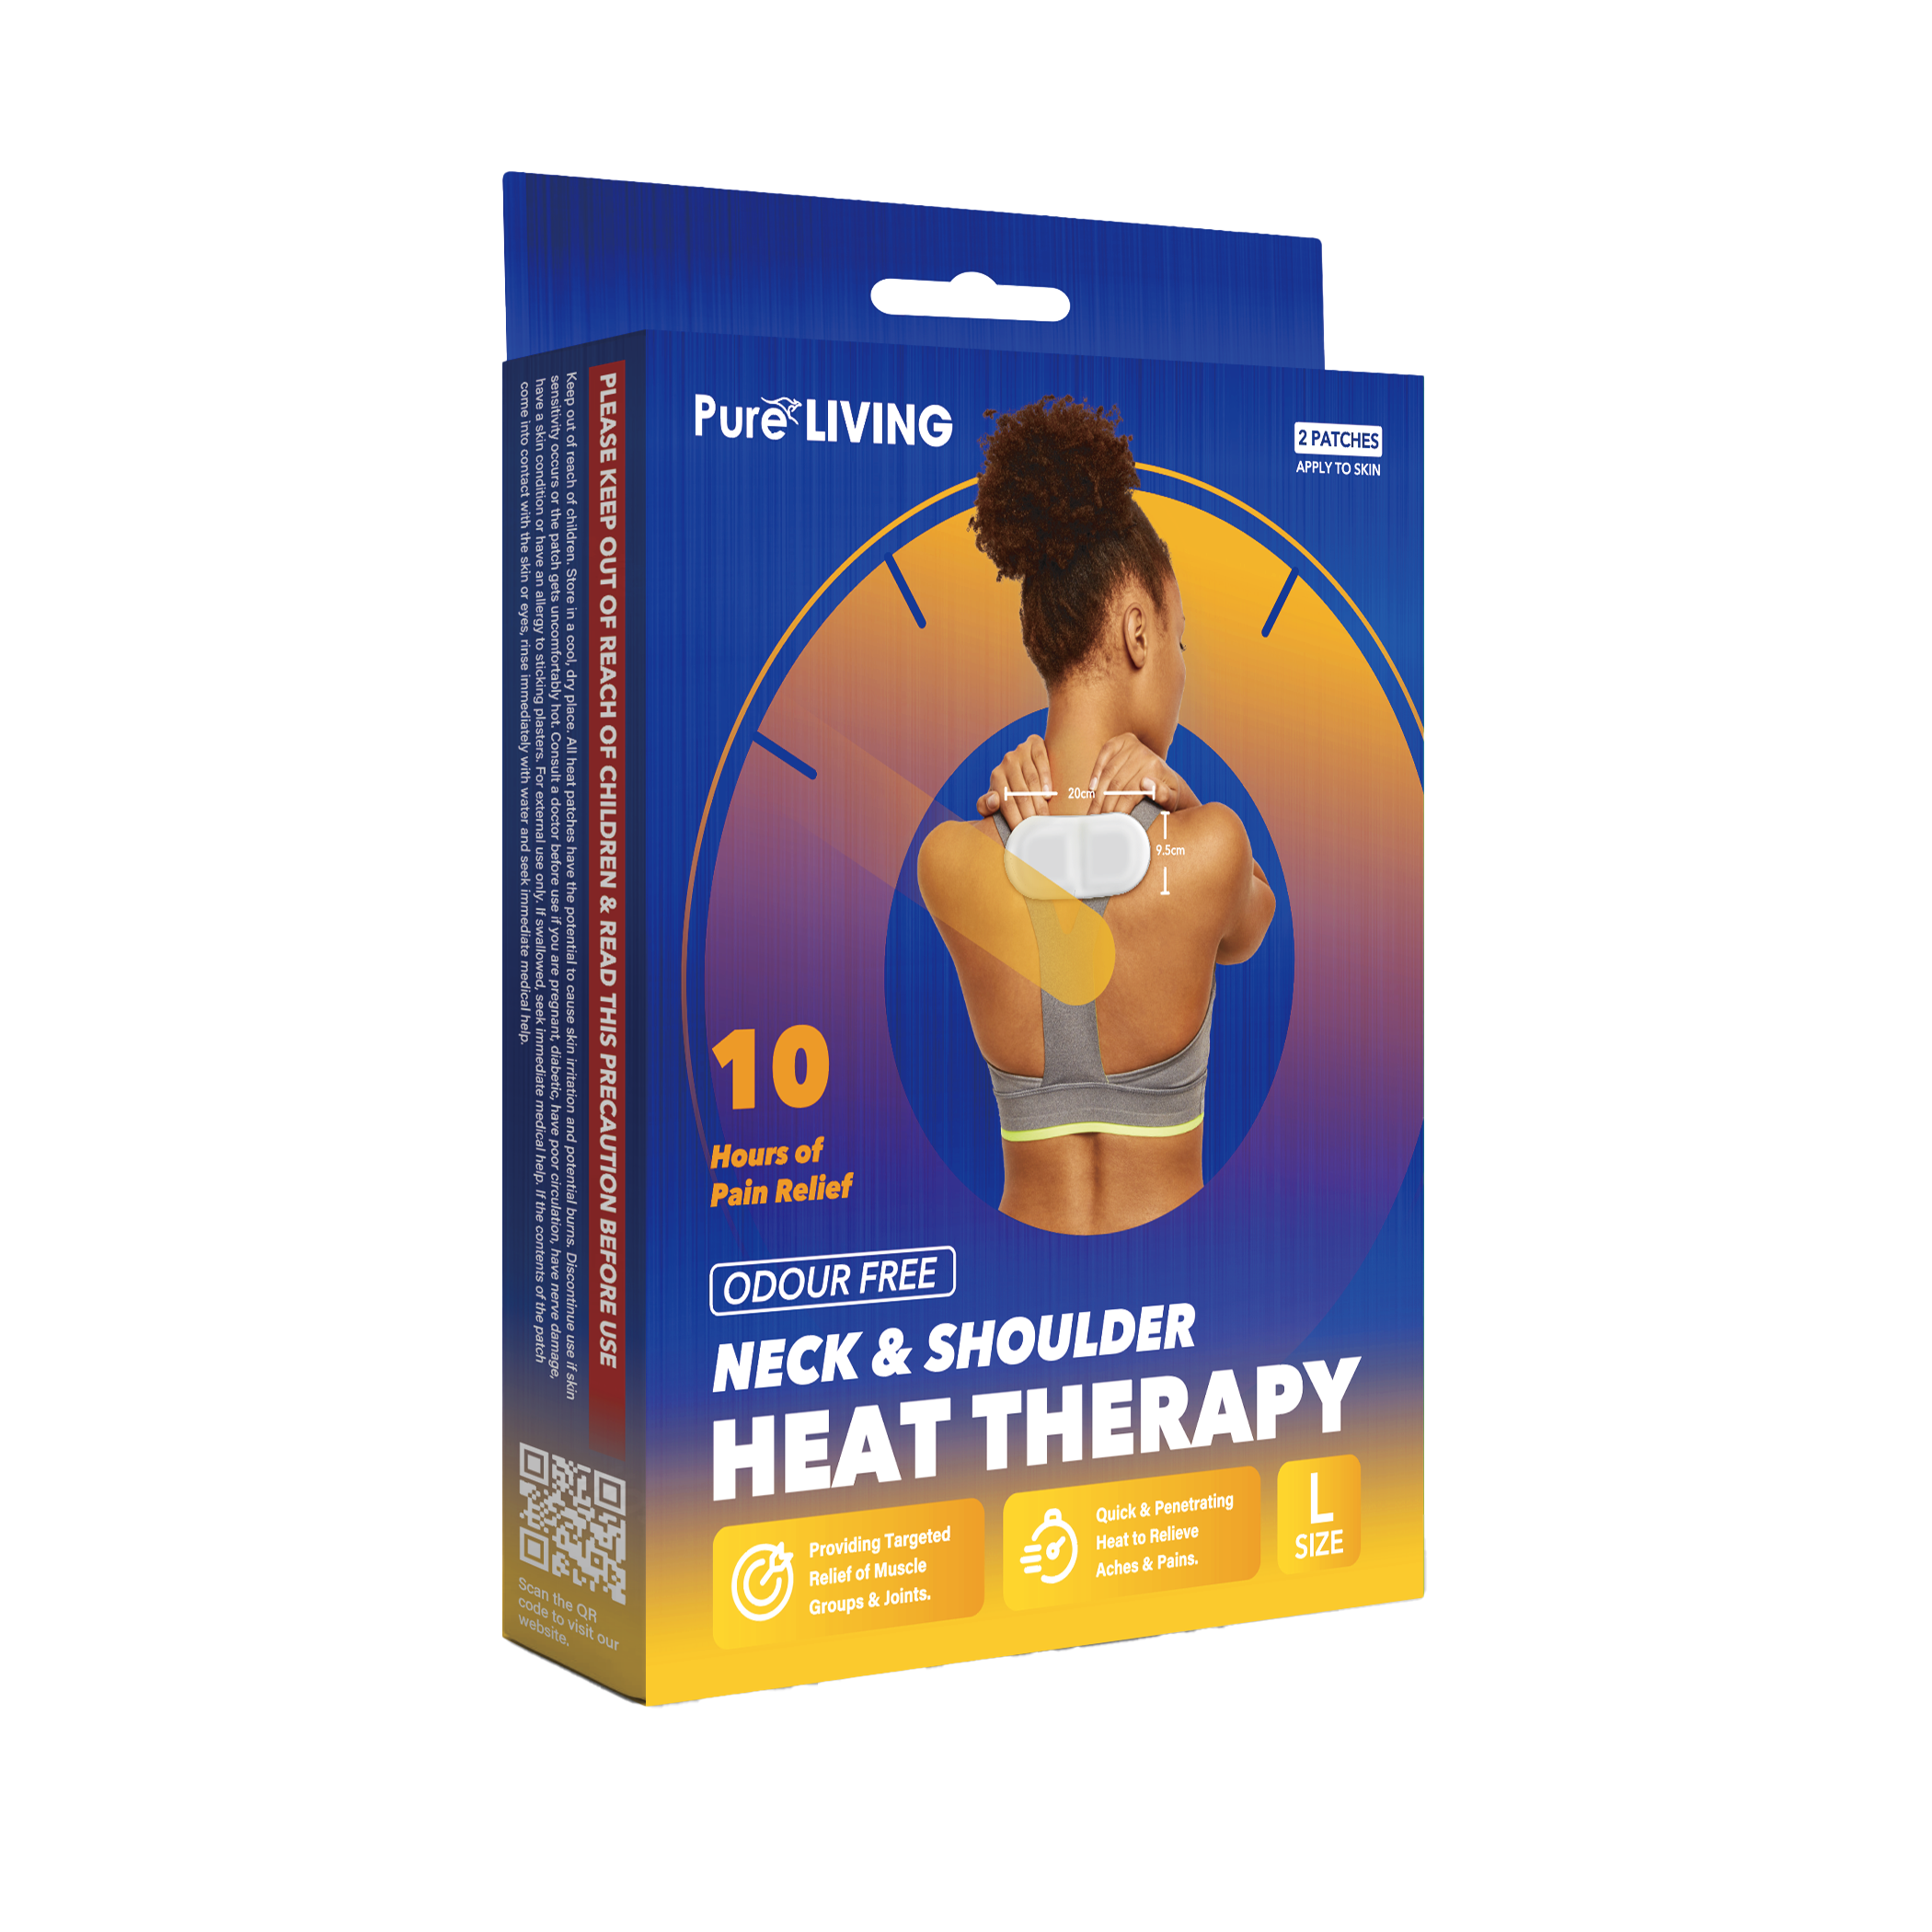 Neck & Shoulder Heat Therapy 2pc